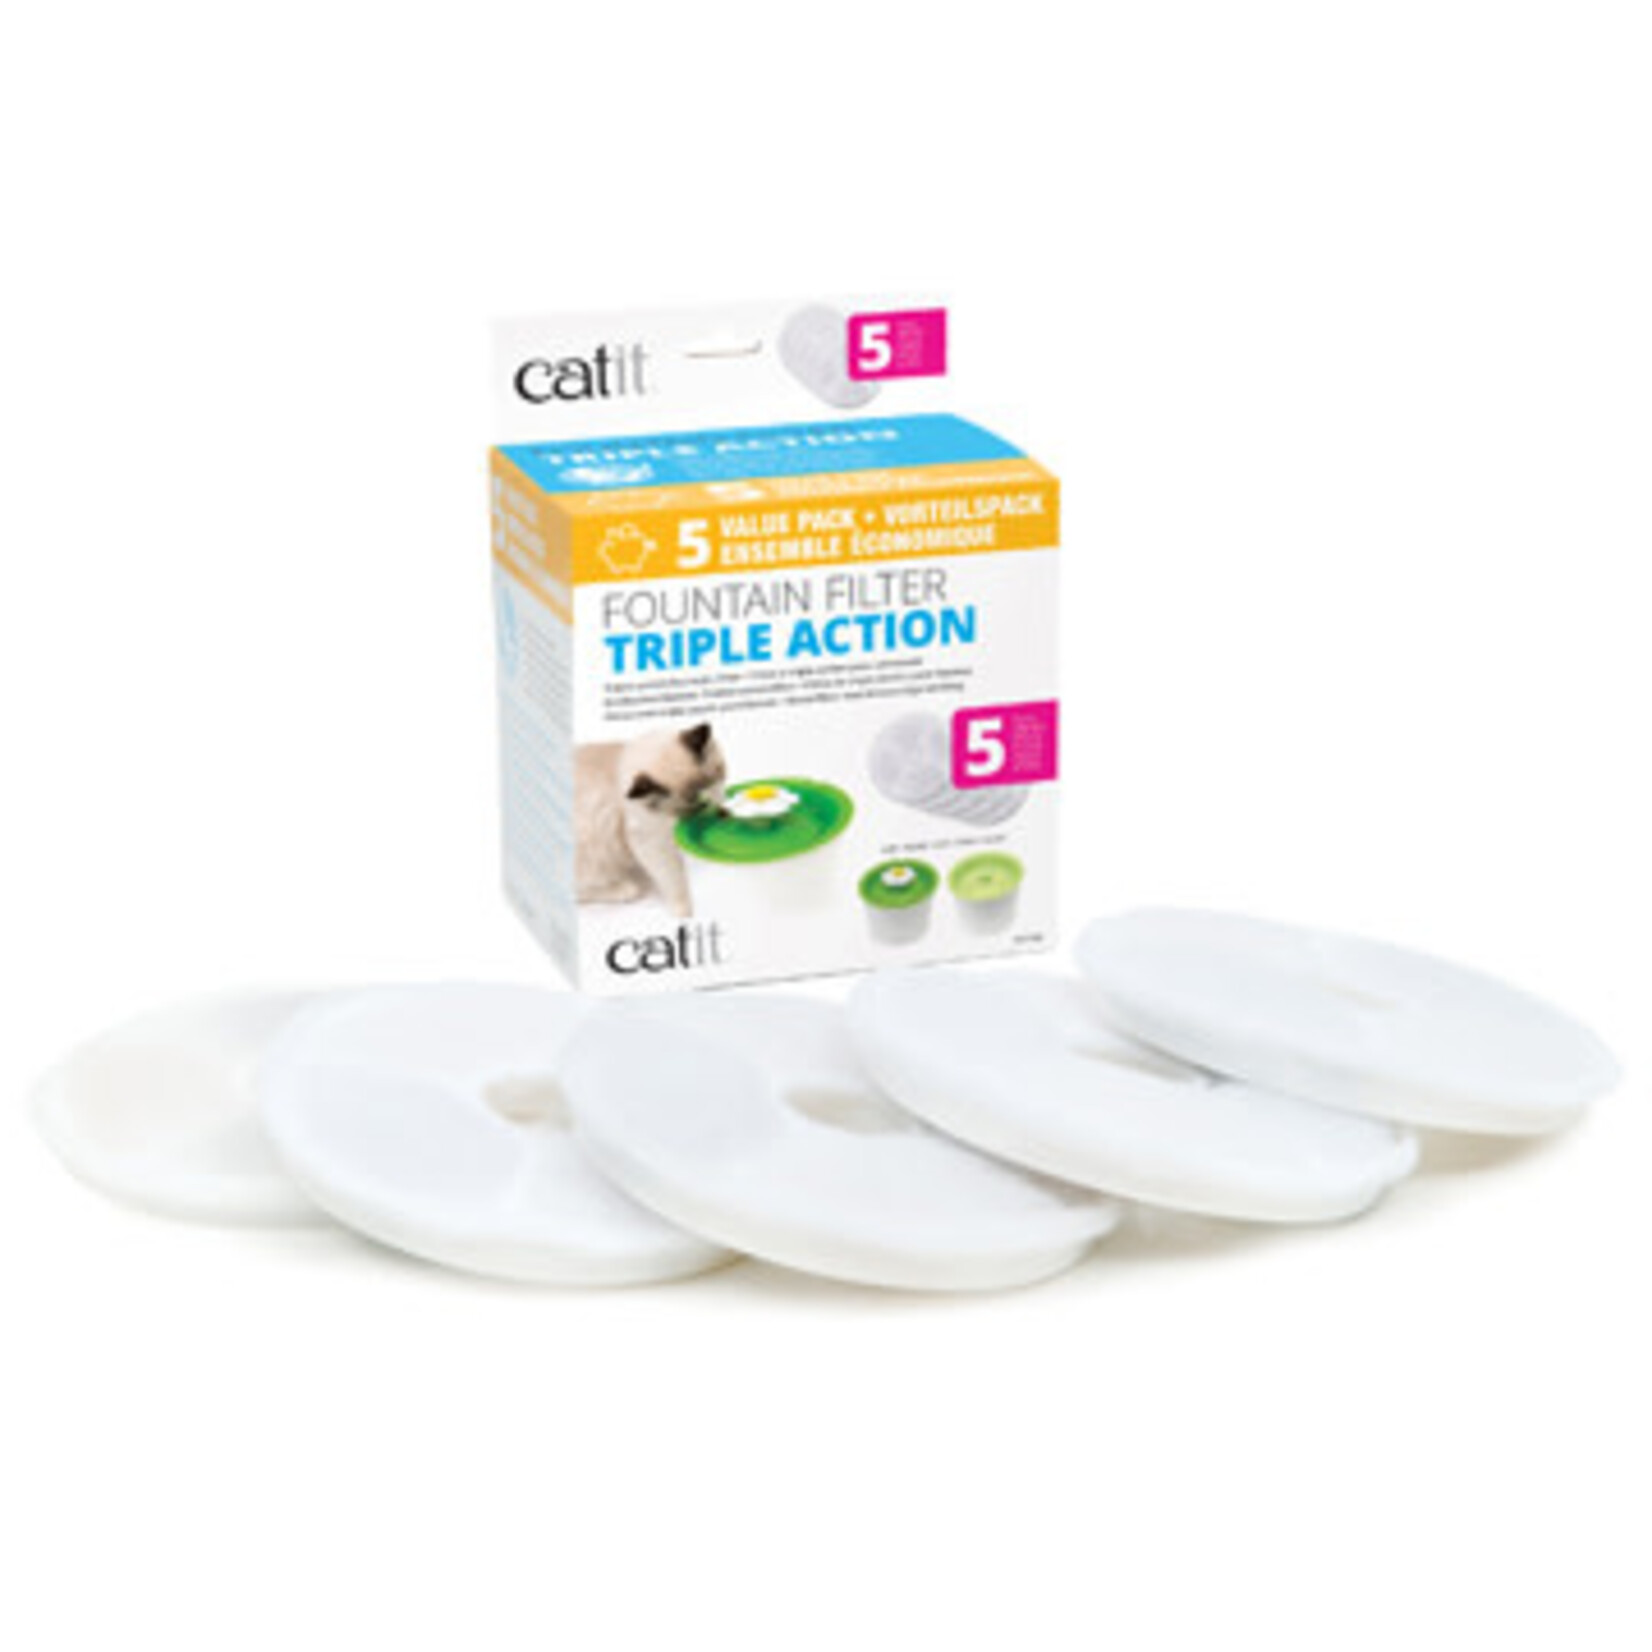 CATIT Catit Triple Action Fountain Filter - 5 pack